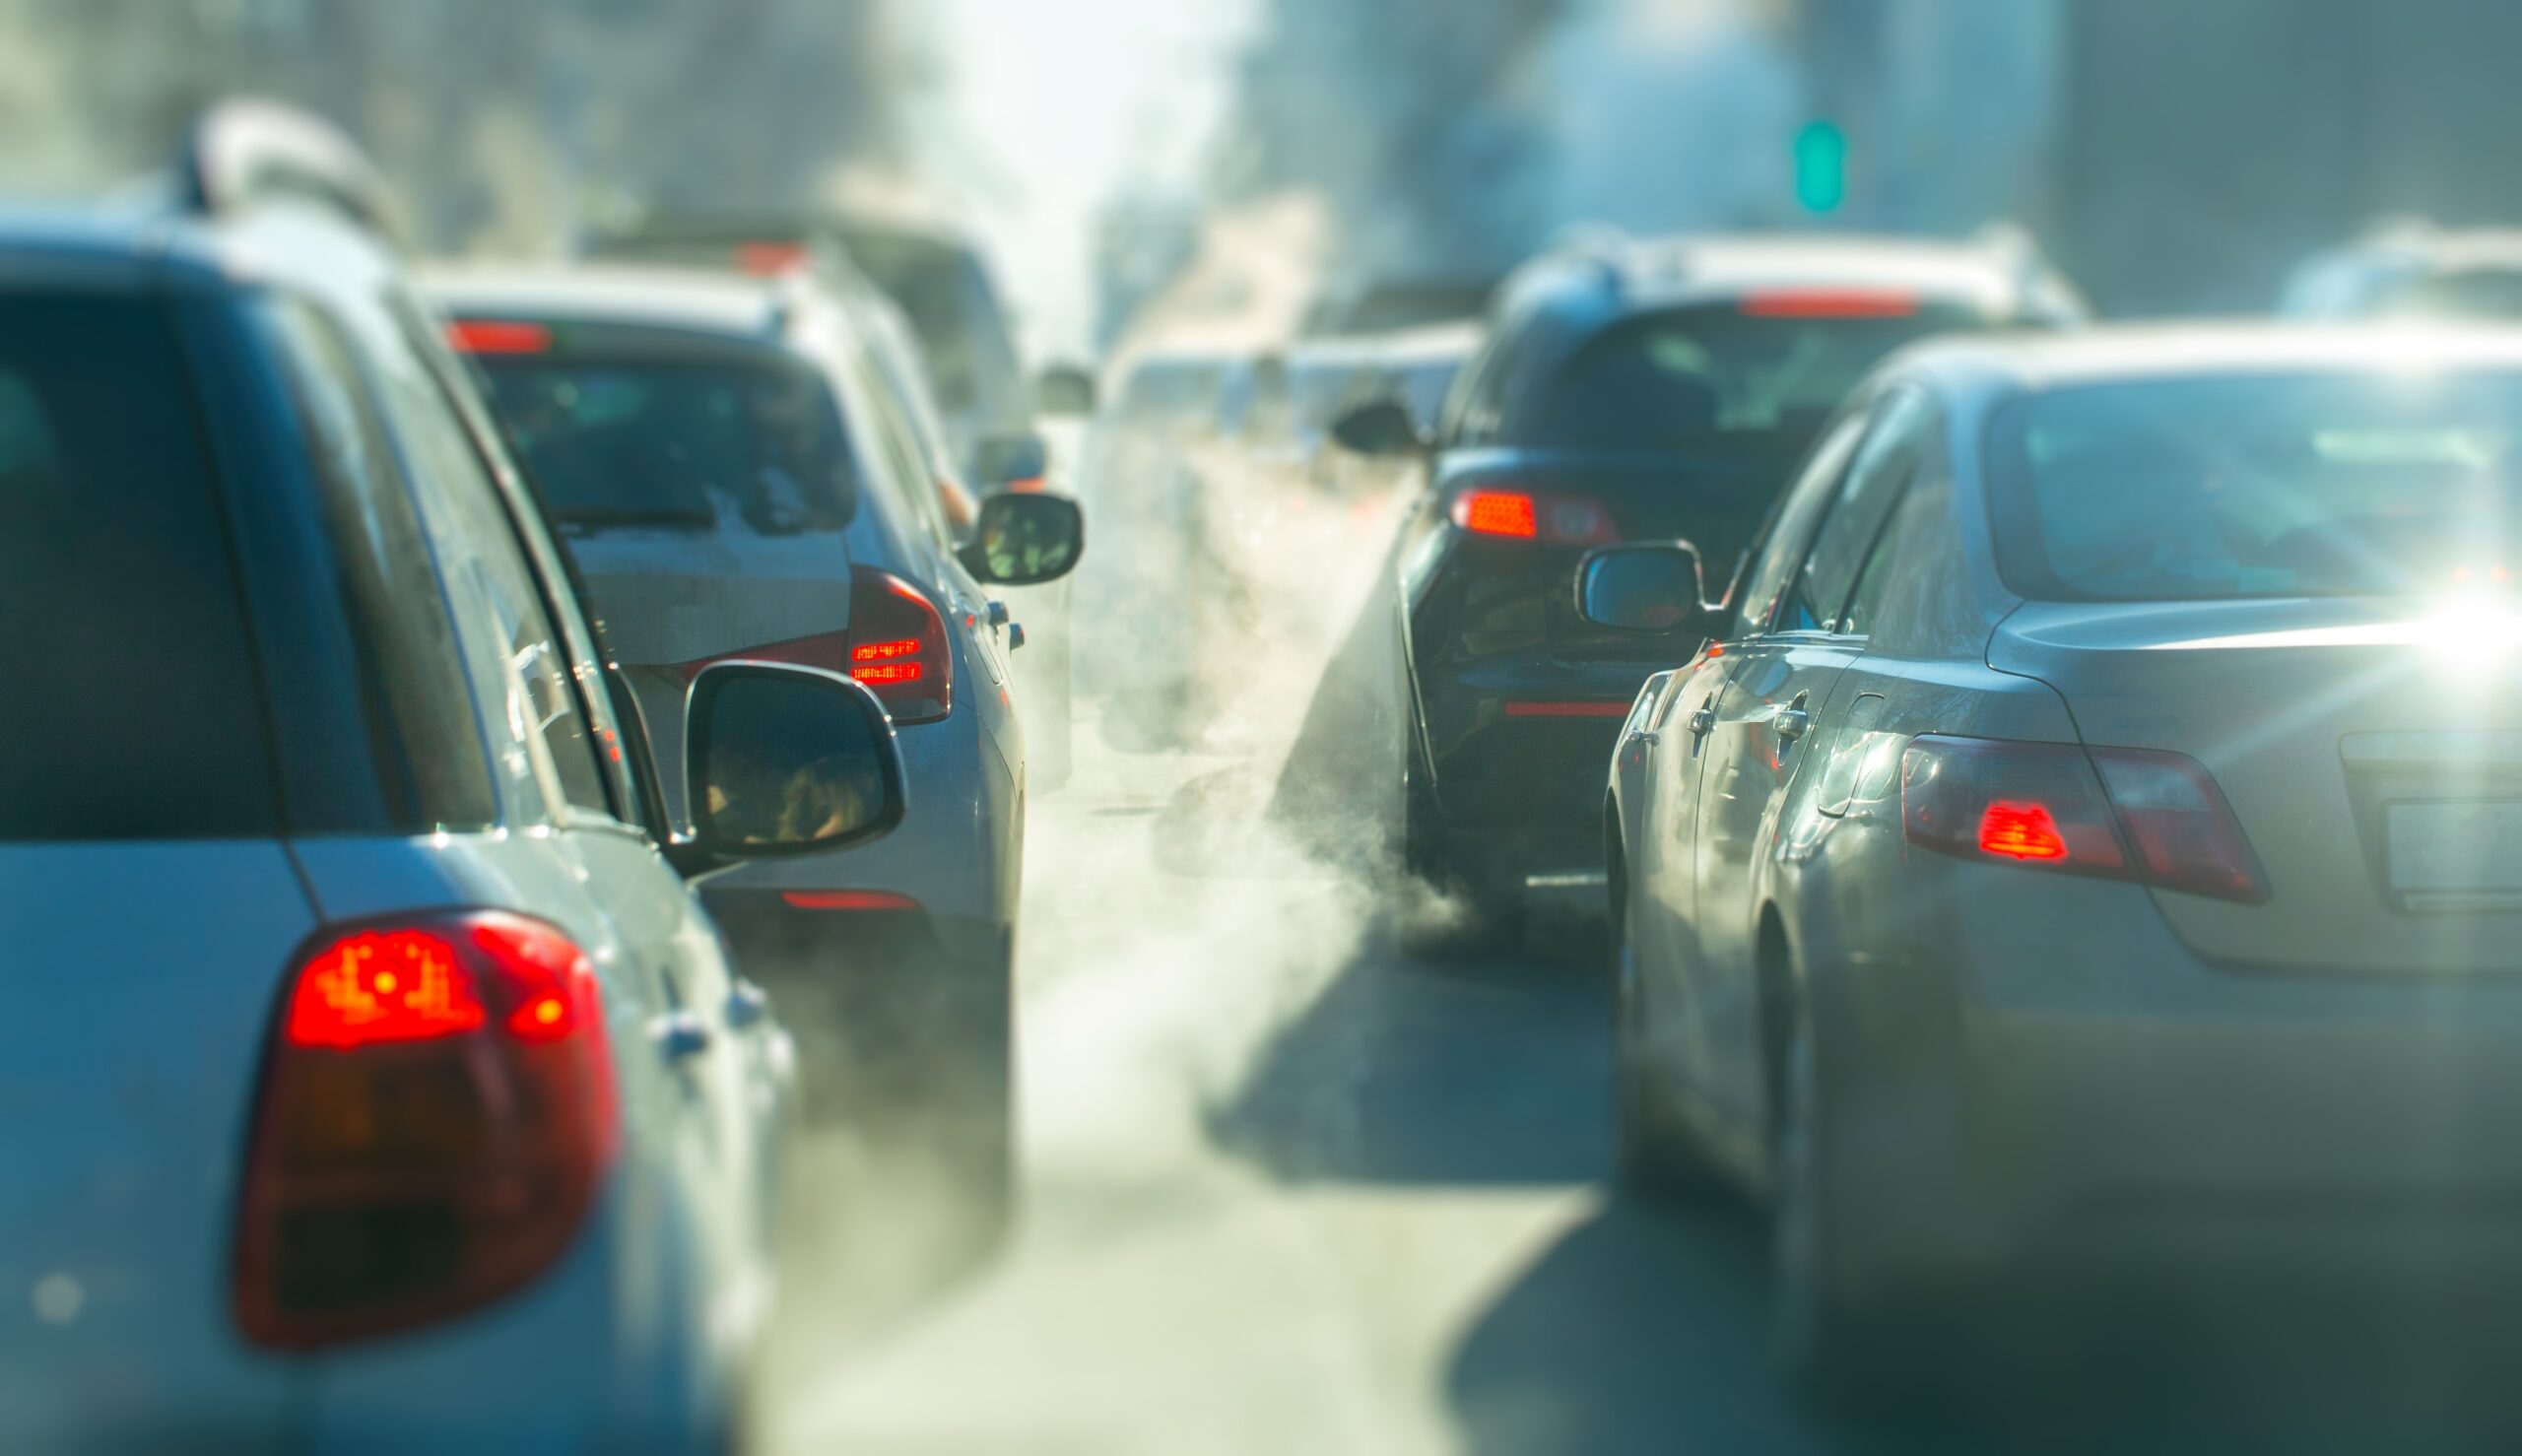 Air Quality Can Be Better For Active Commuters Than Drivers, Research Shows